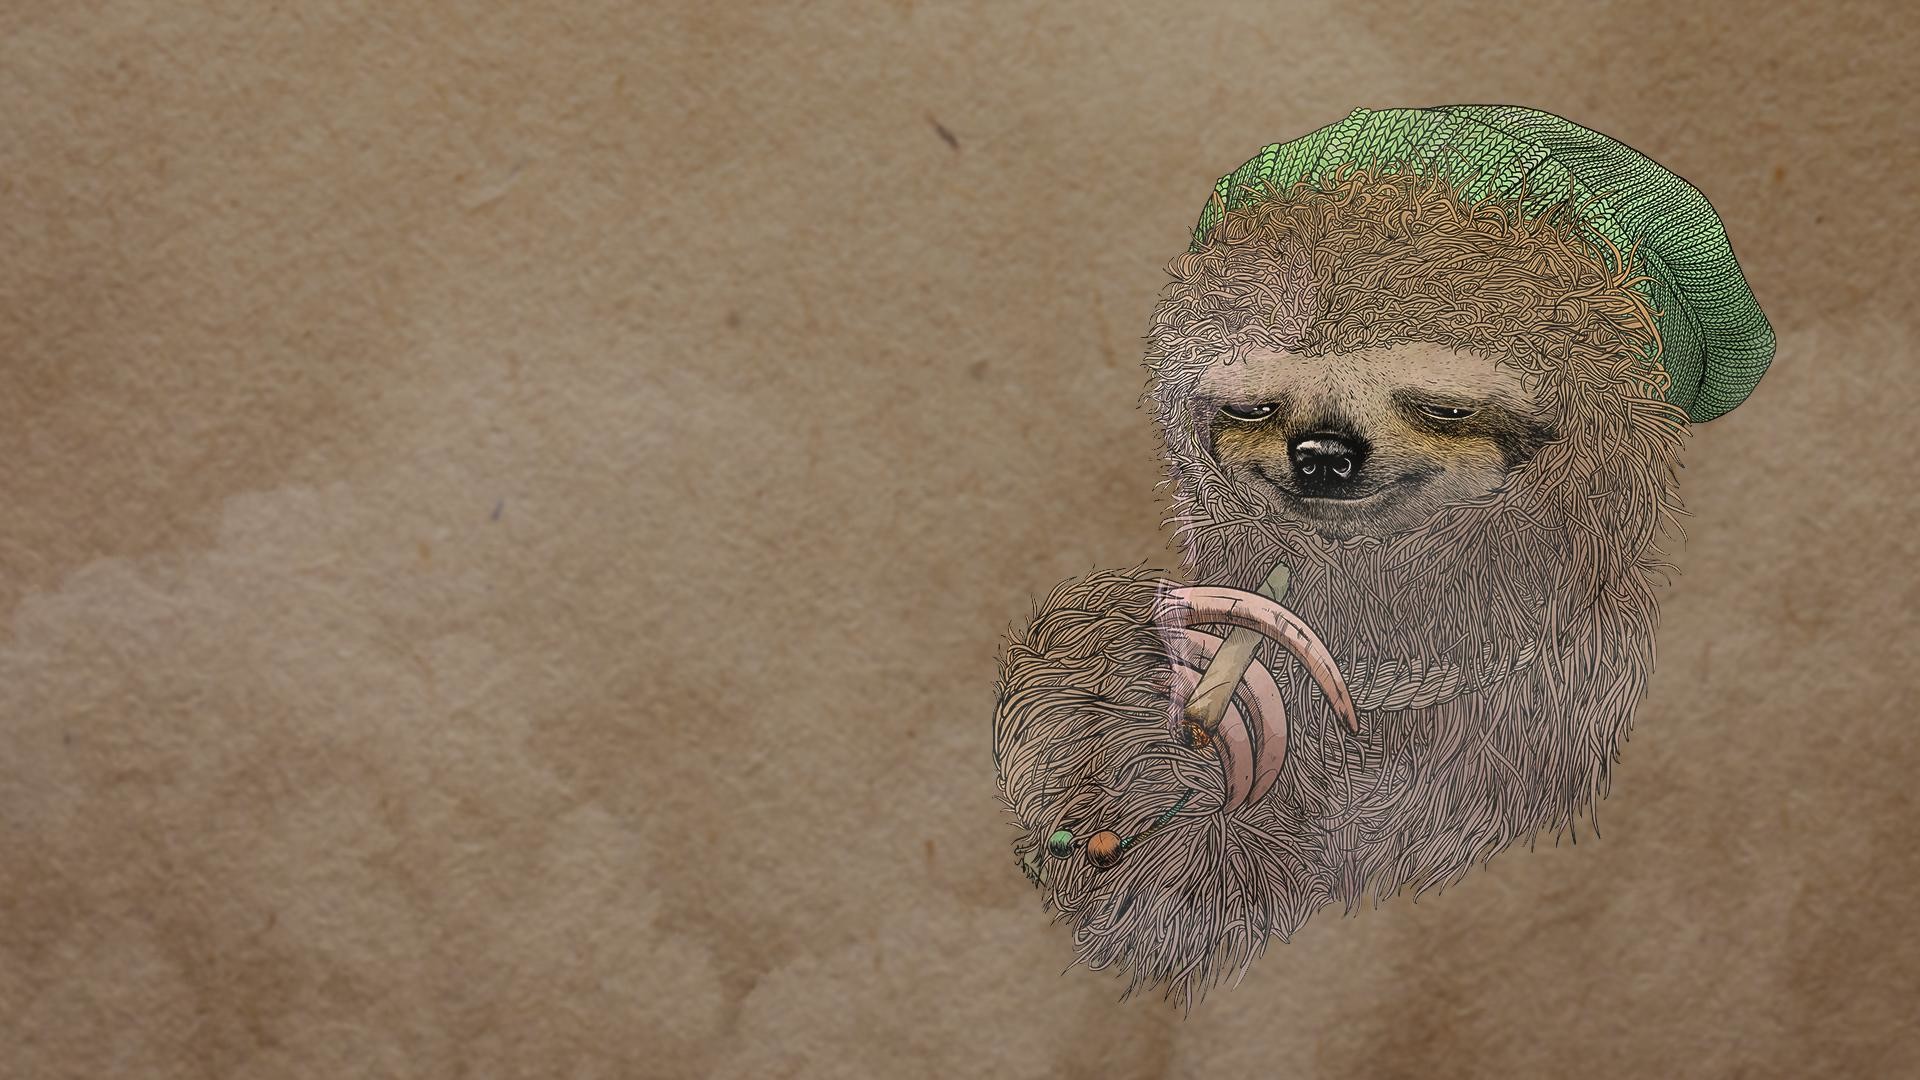 1920x1080 I made a wallpaper from the stoner sloth image.